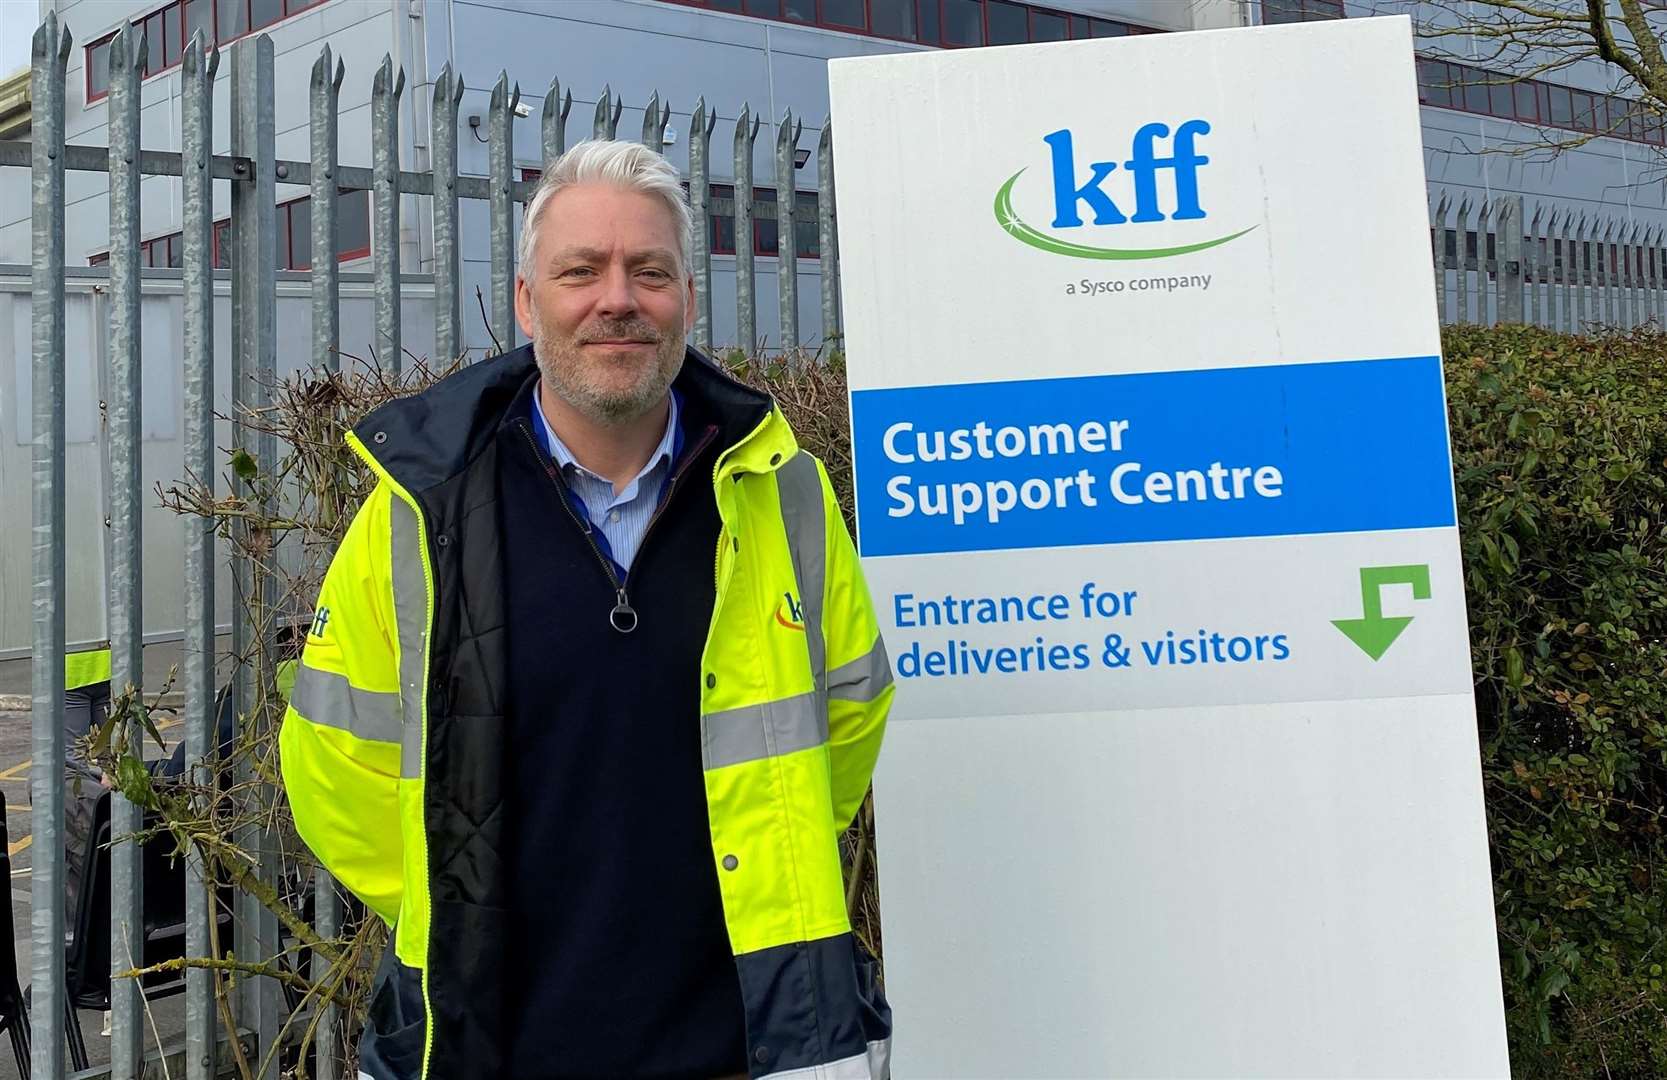 Mark Taylor has been appointed MD at Kff